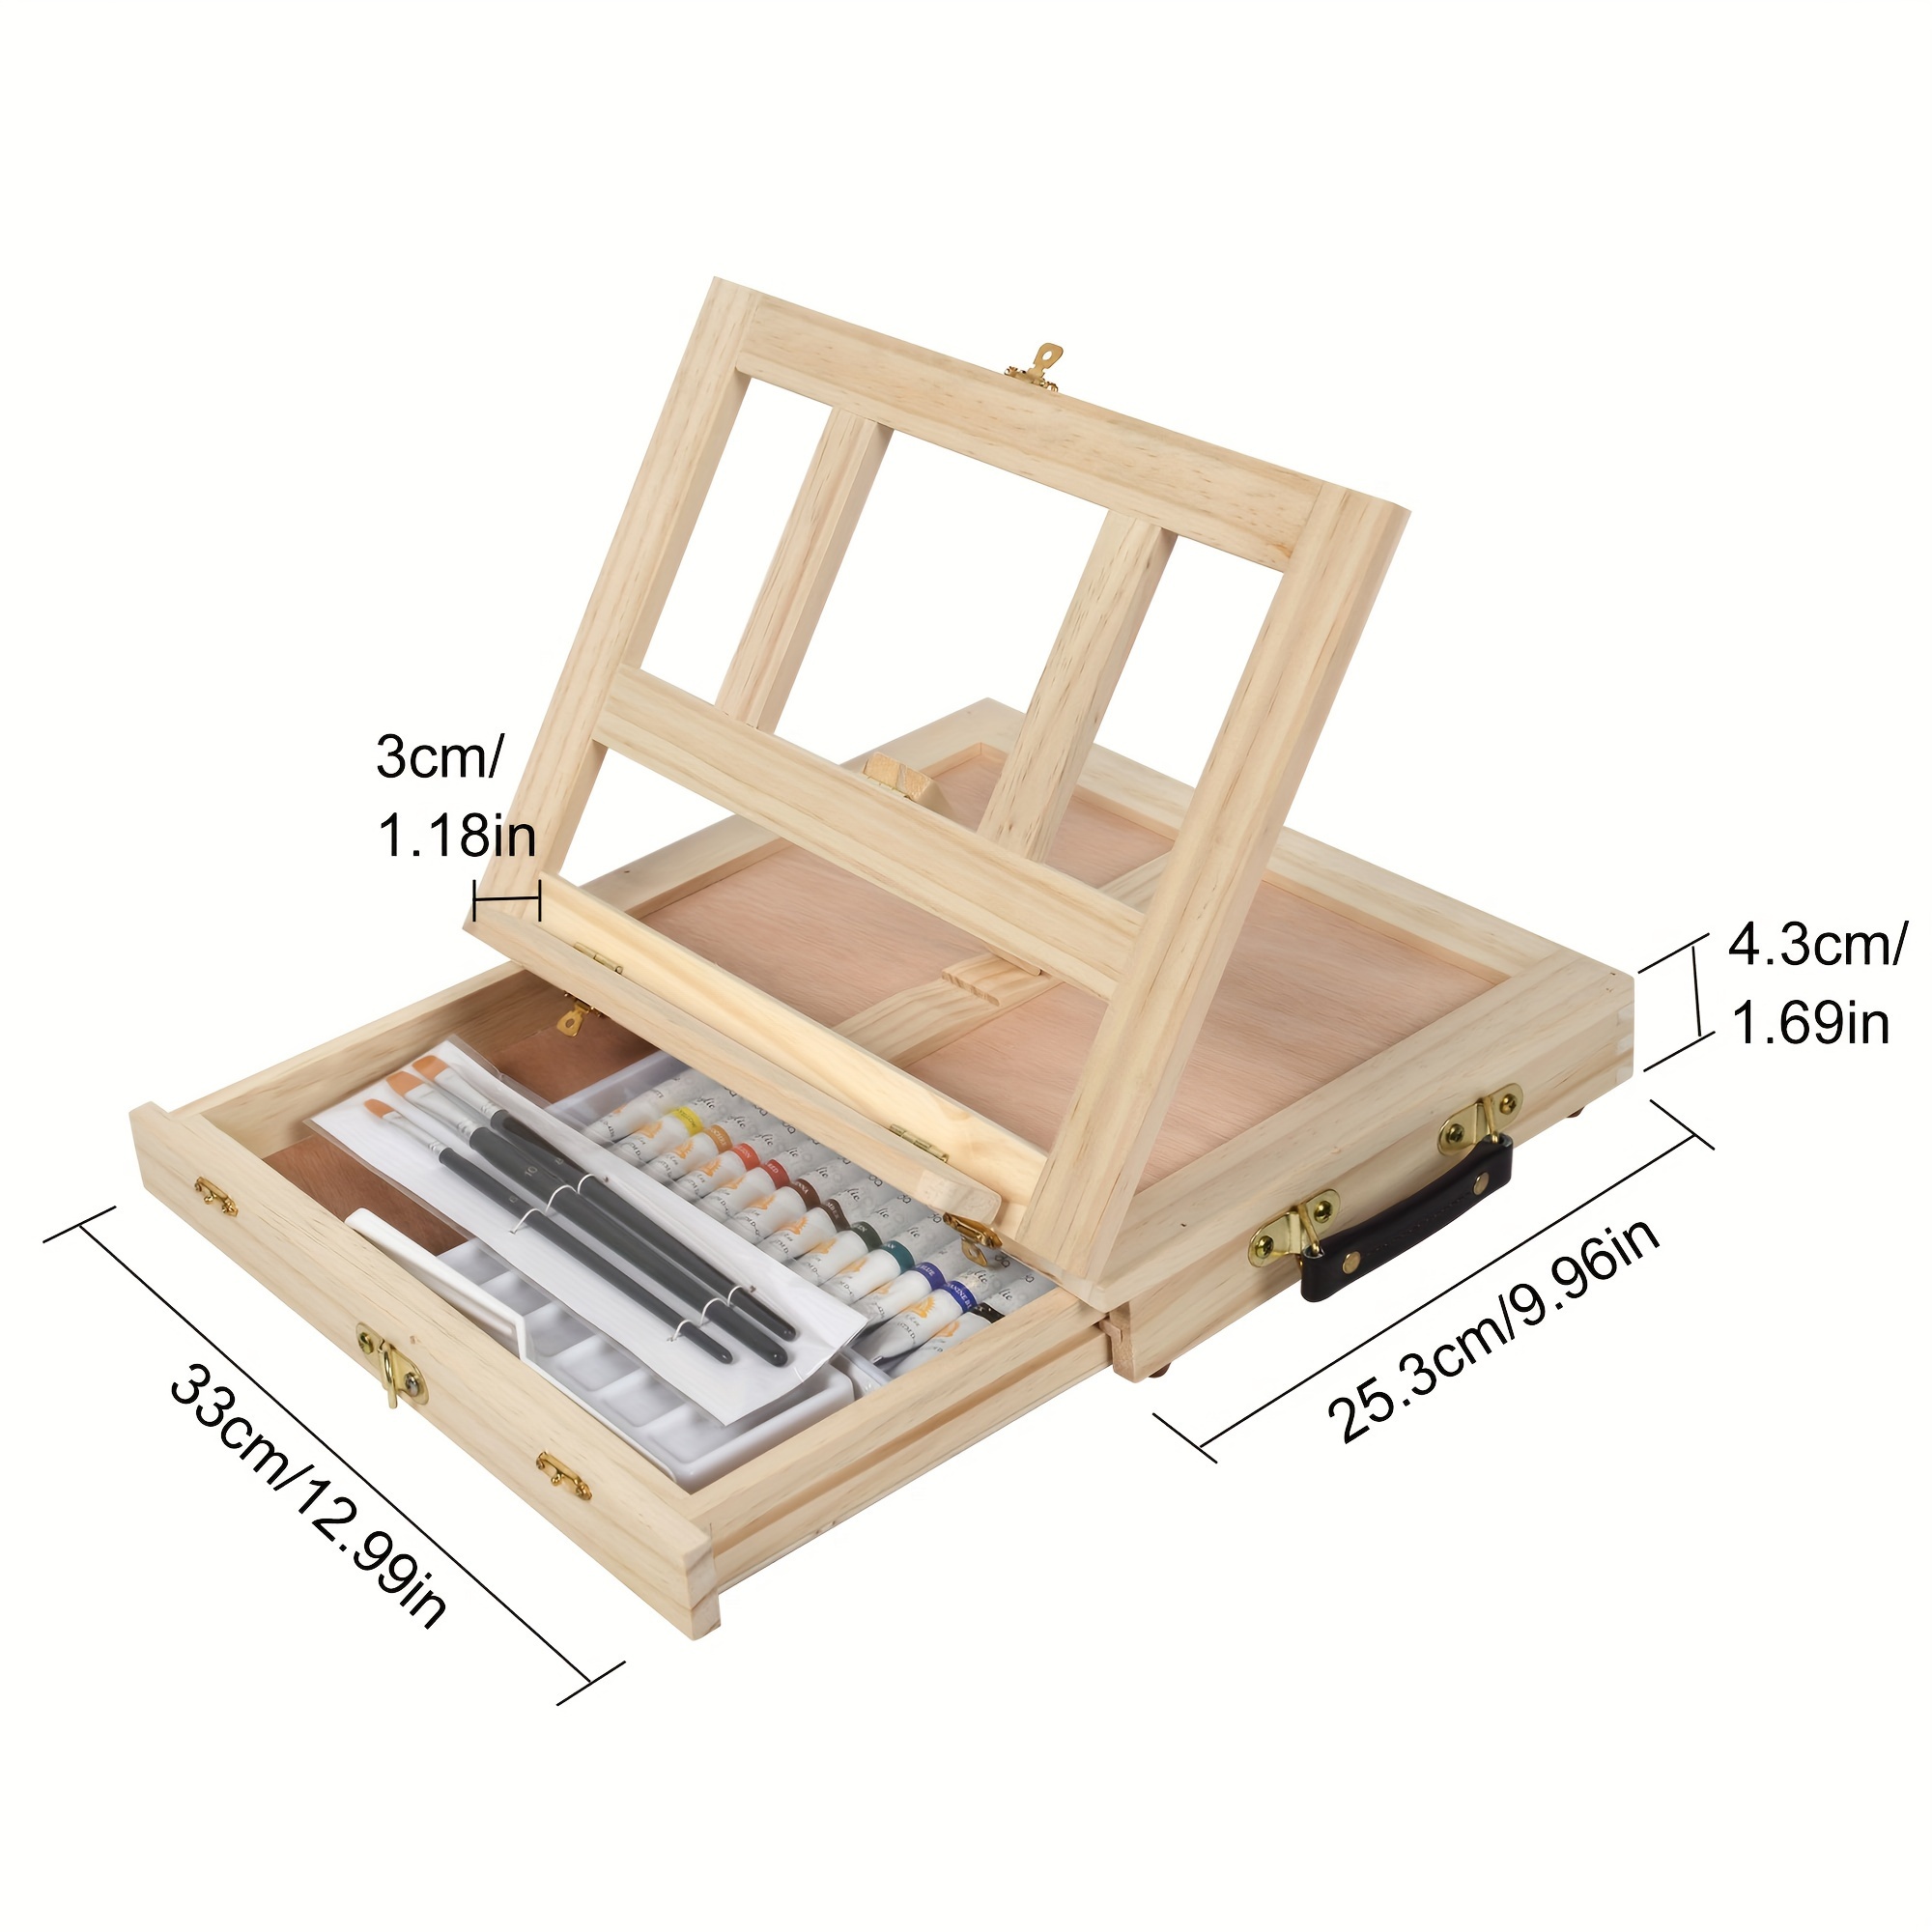 Wooden Art Kit Painting Supplies in Portable Wooden Art Case